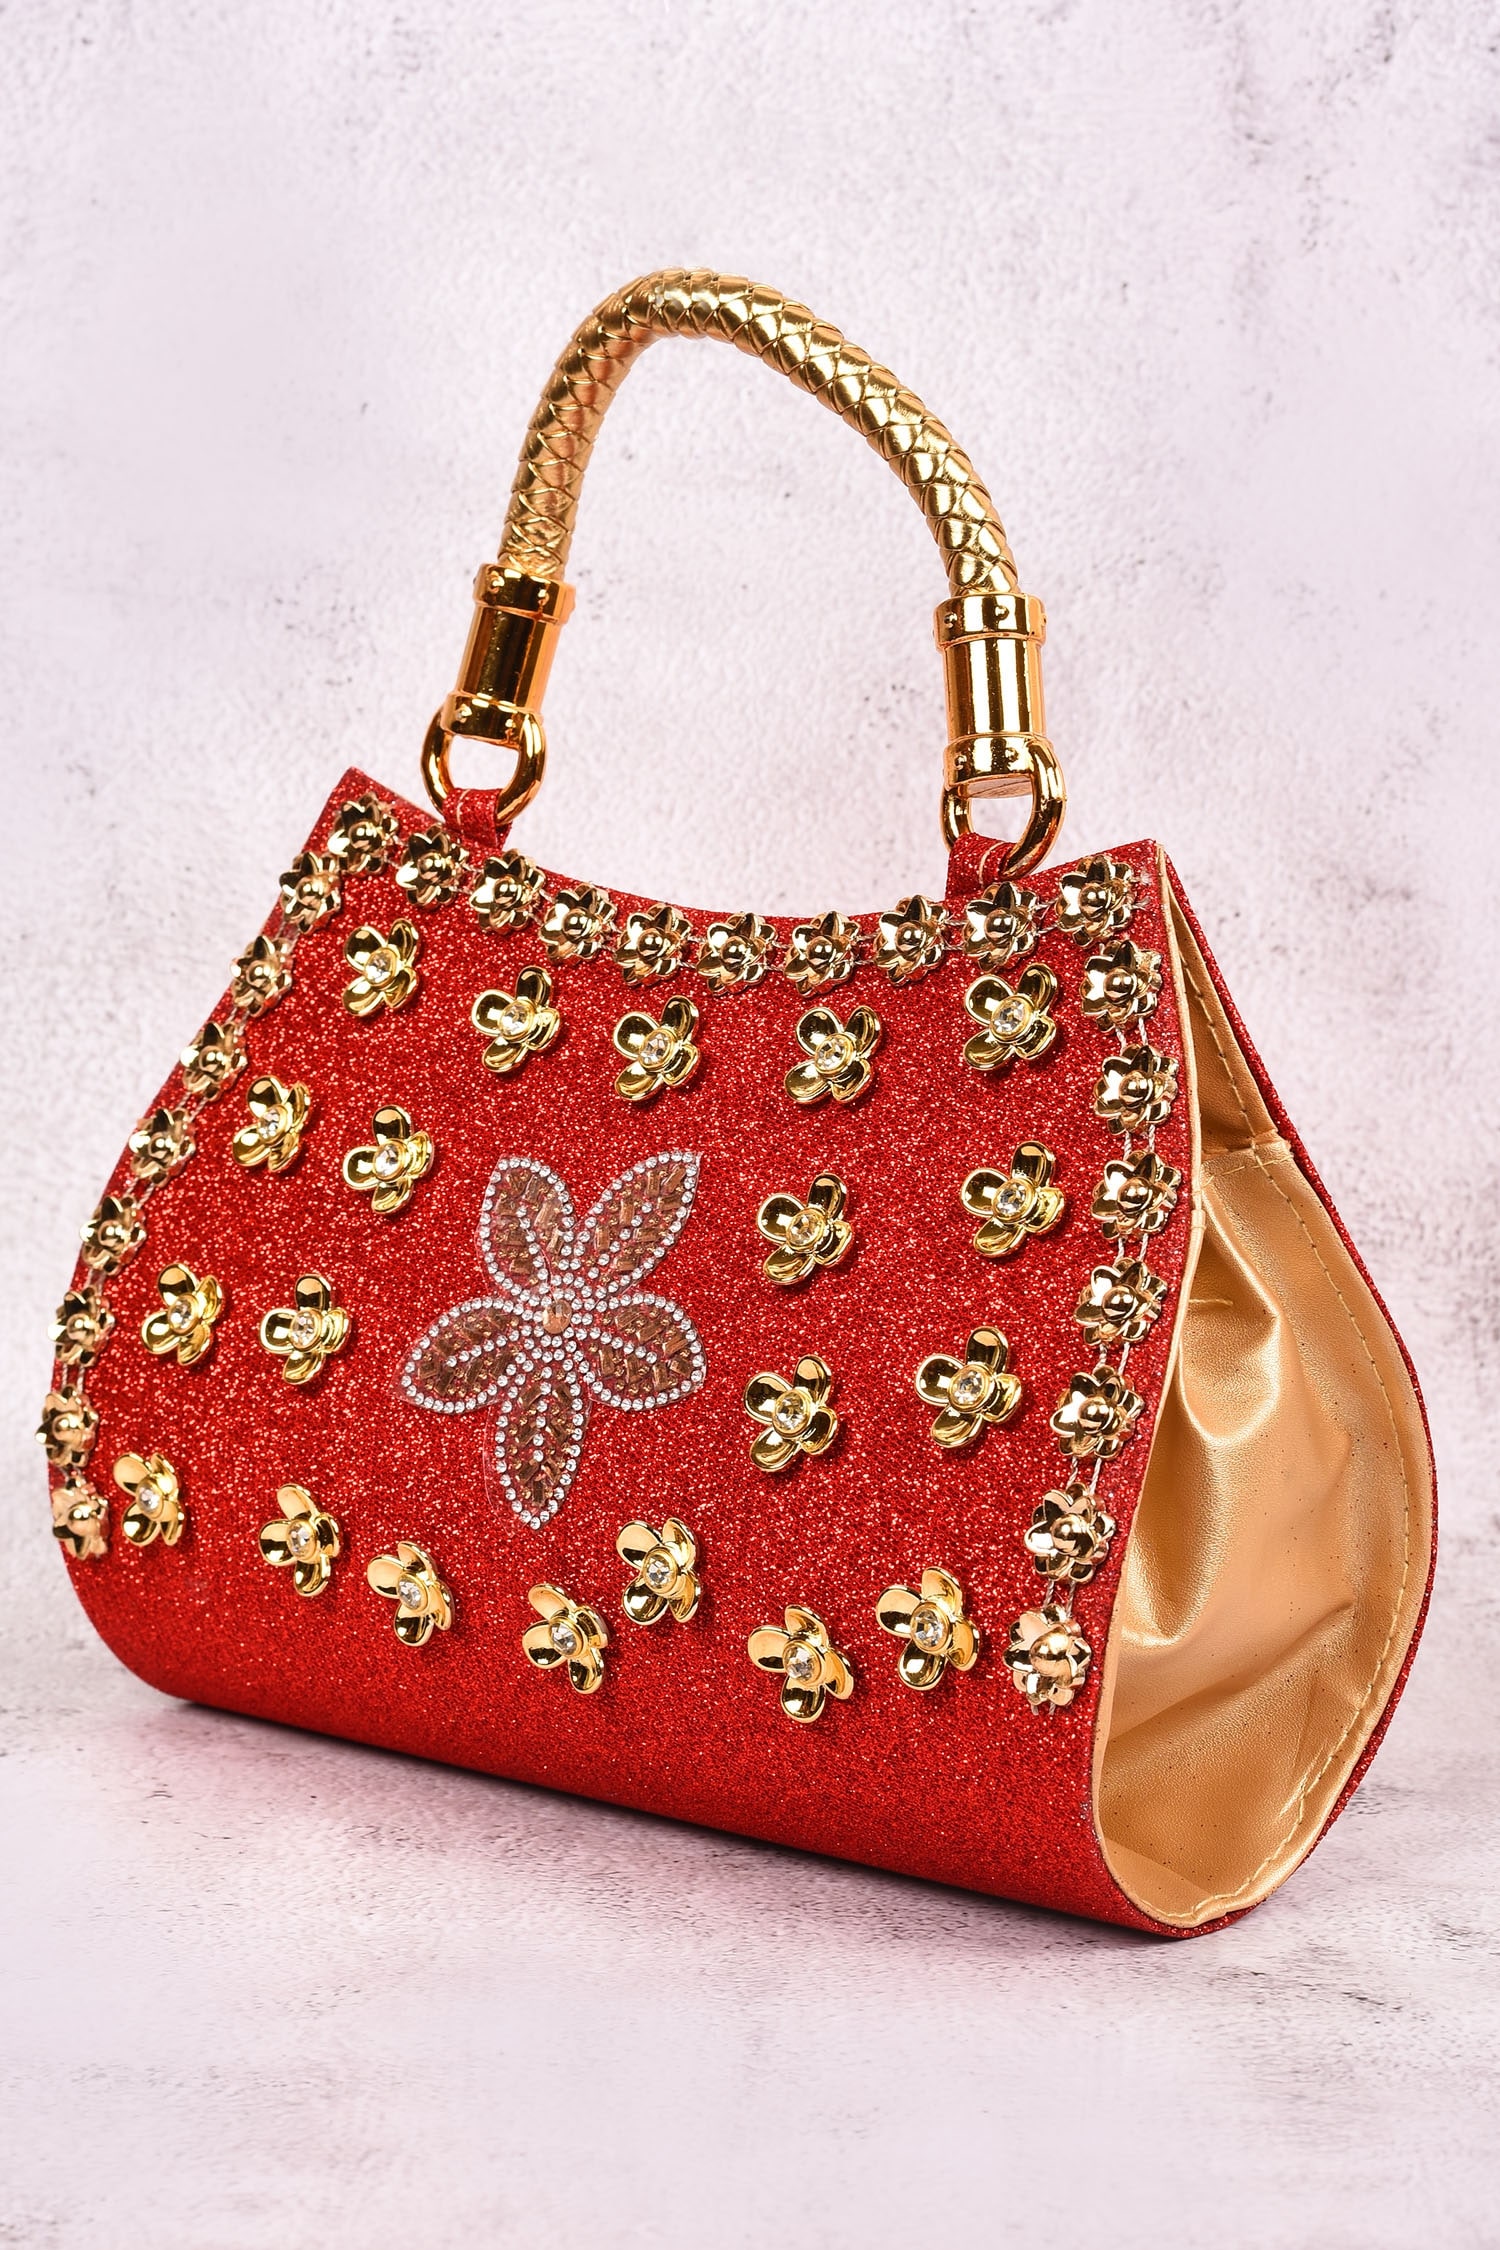 Red color hand-made leather bag for women | Handcrafted in Bengal